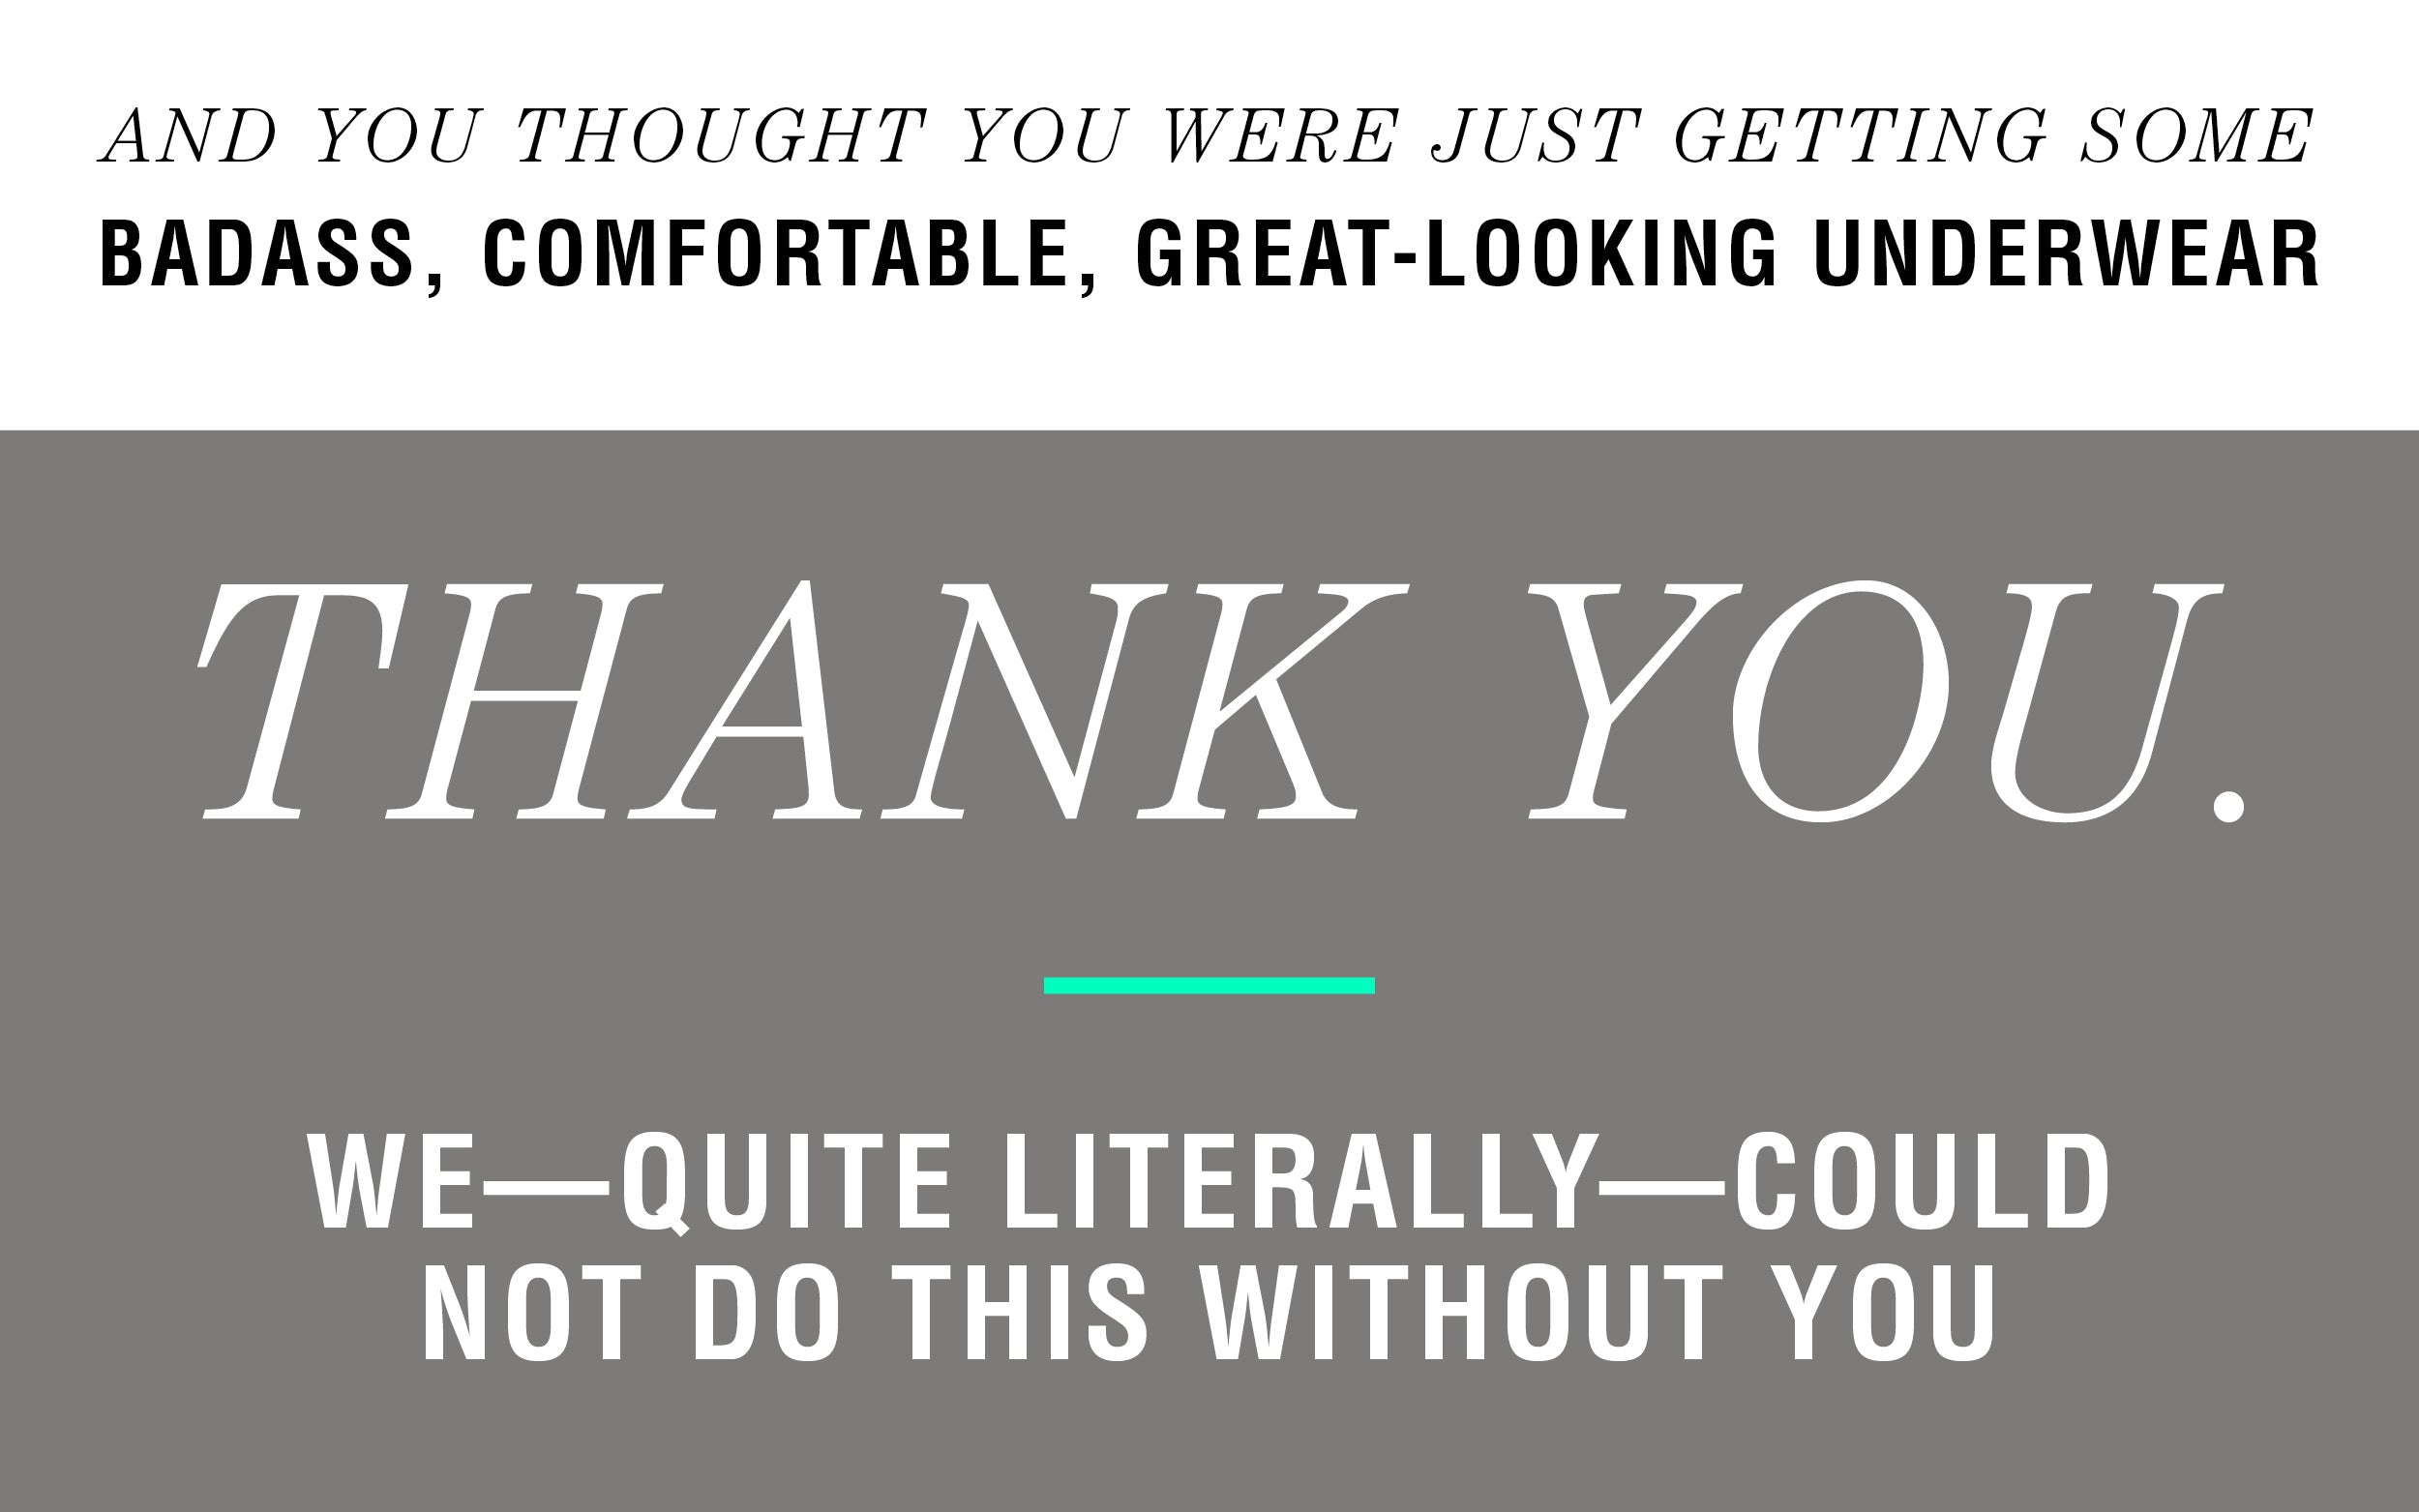 And you thought you were just getting some 
Badass, comfortable, great-looking underwear. Thank you. We—quite literally—could not do this without you